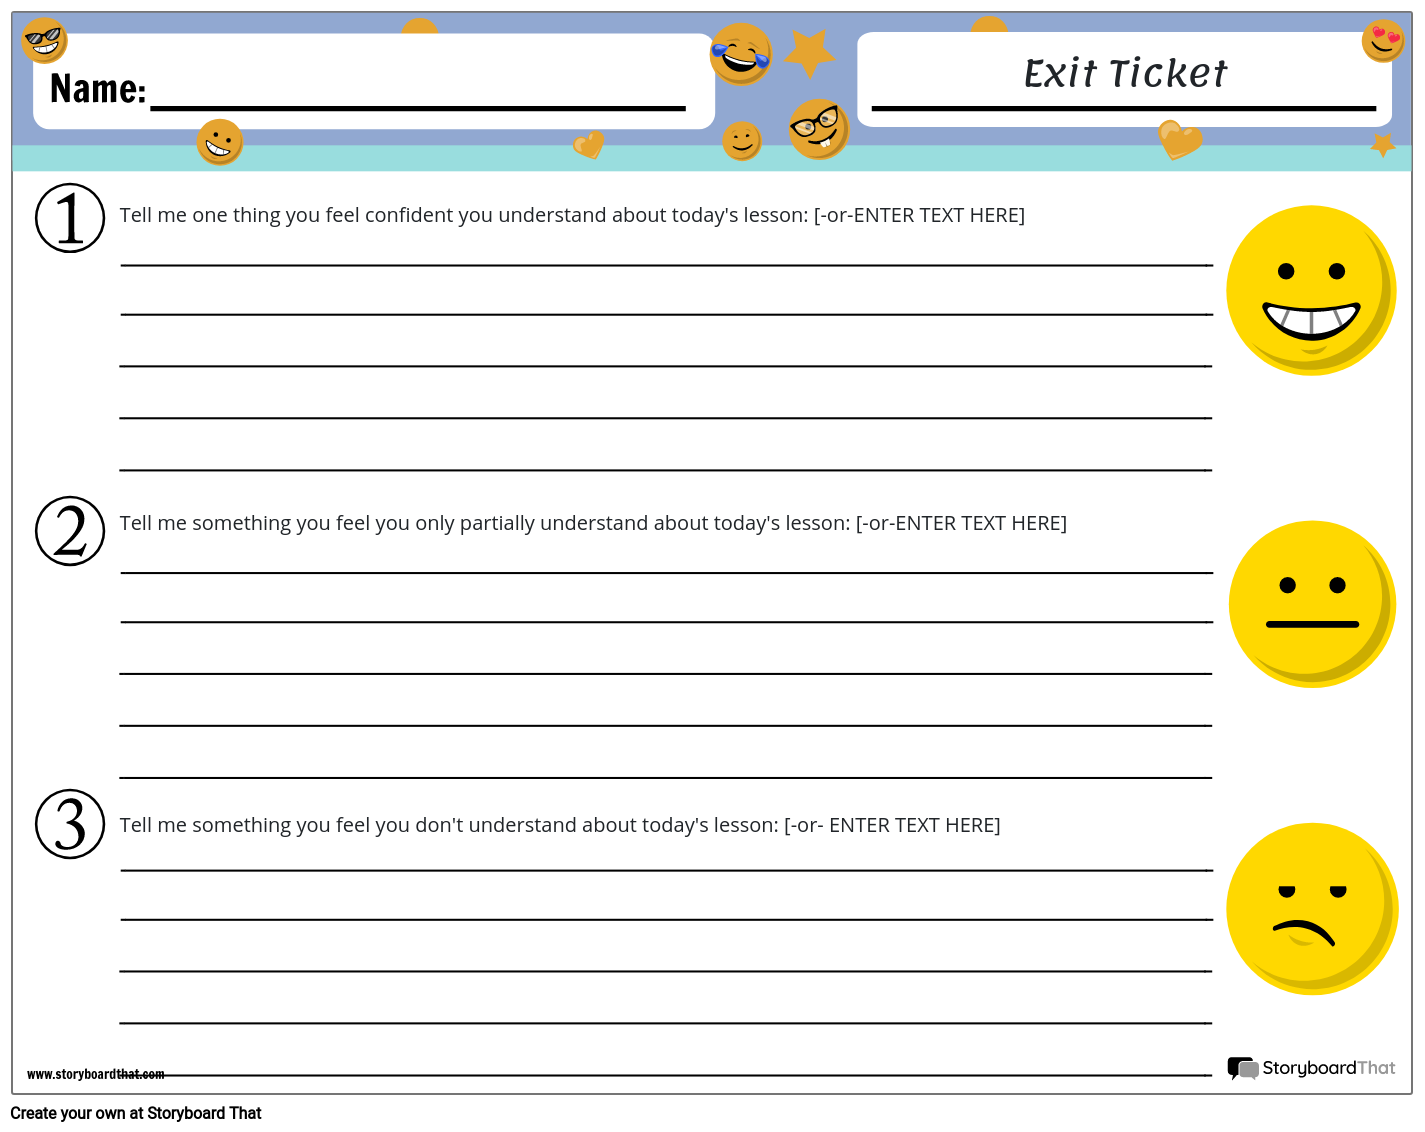 How I Feel Themed Exit Ticket Template